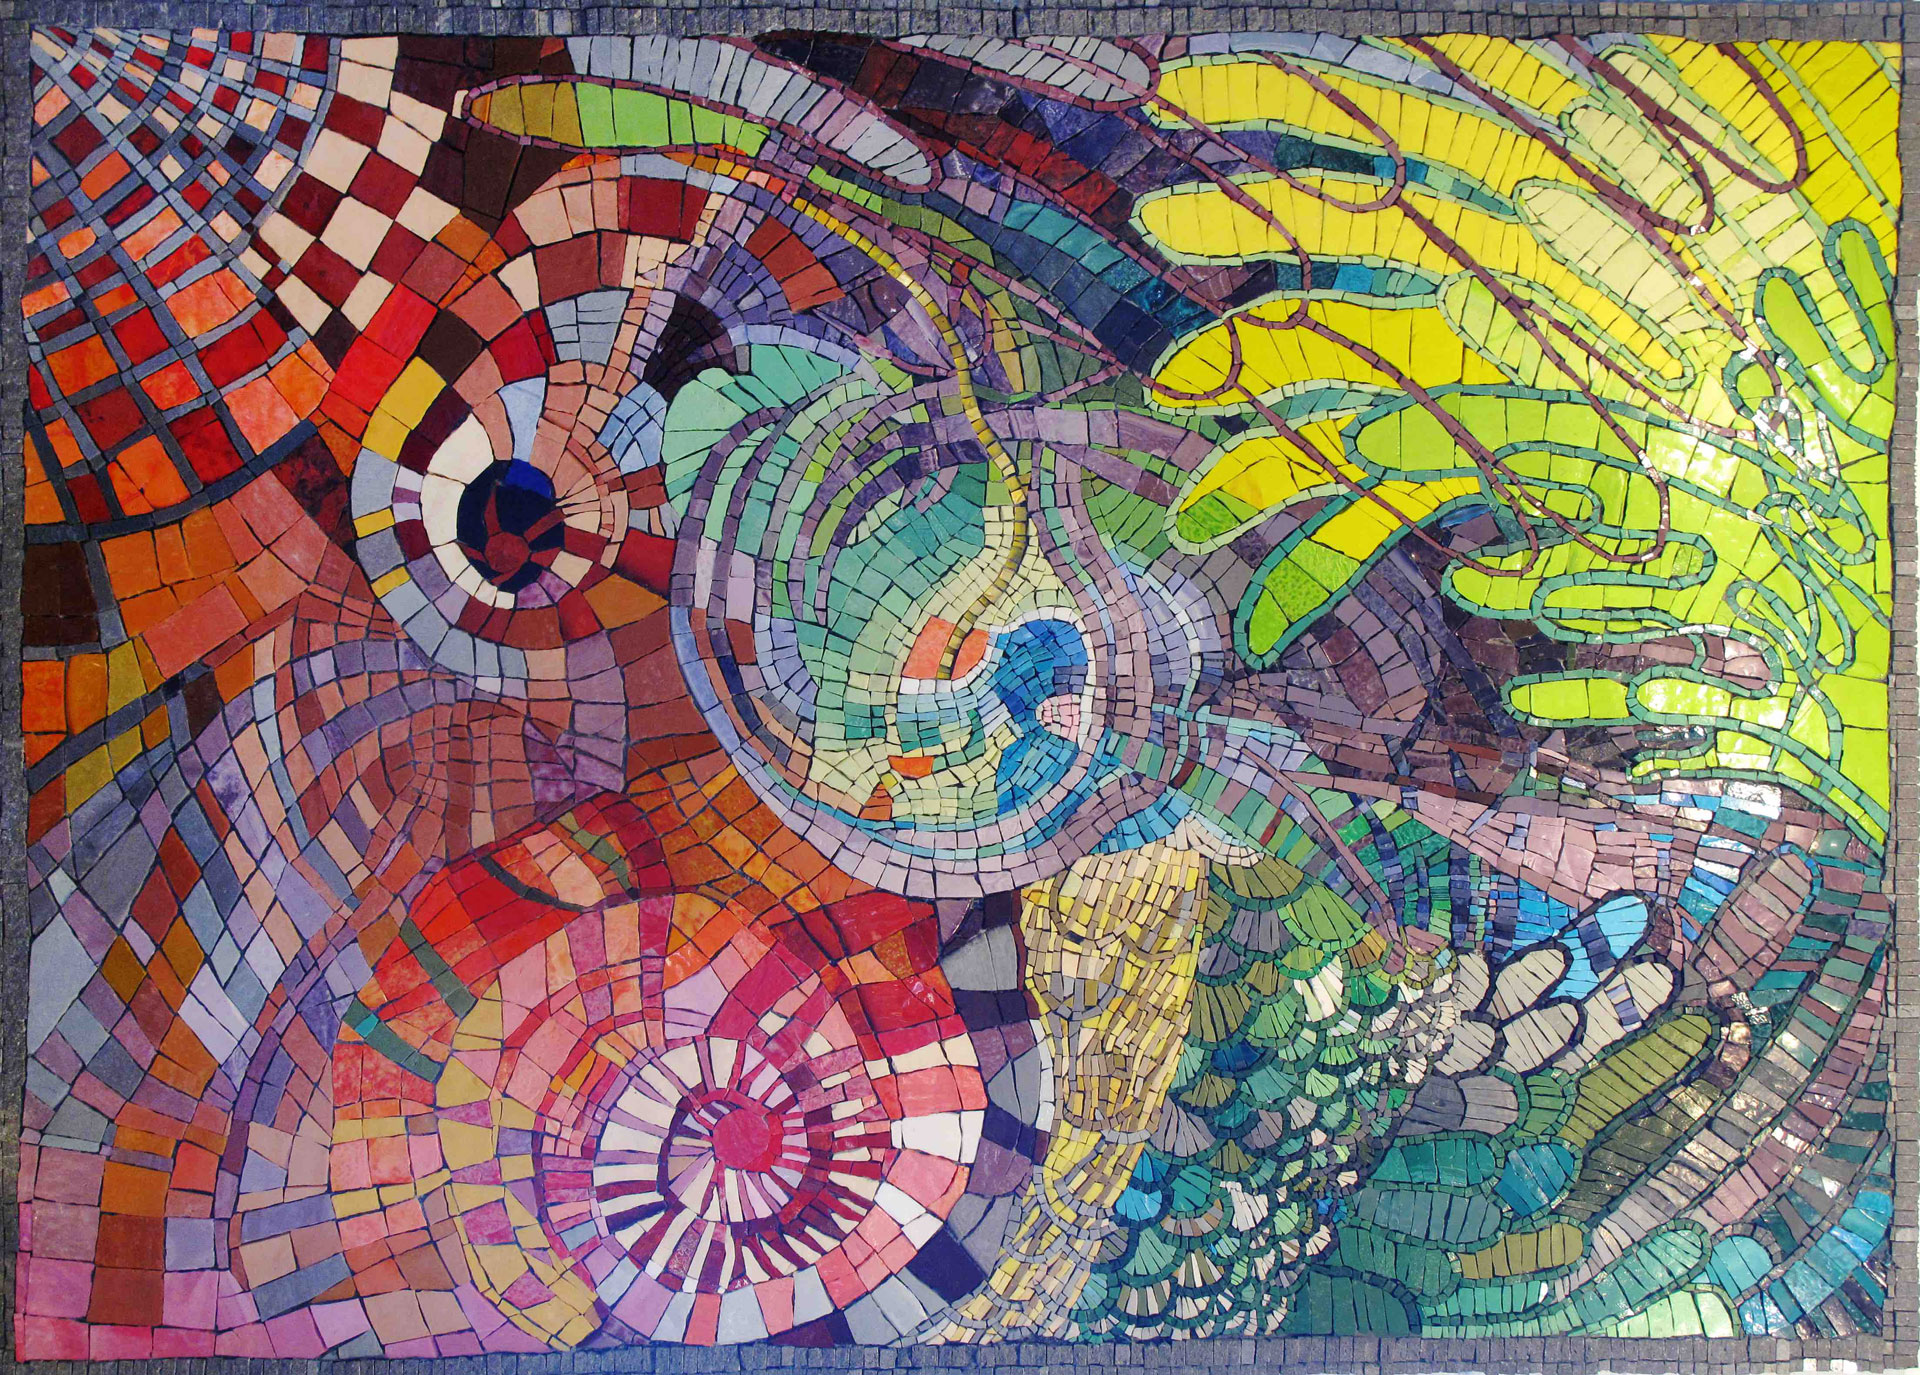 A colorful mosaic composed of small tiles arranged in intricate patterns and swirls. This piece of local art features a mix of geometric shapes, including circles and squares, with a vibrant palette of reds, blues, greens, yellows, and purples, creating a dynamic and lively image.